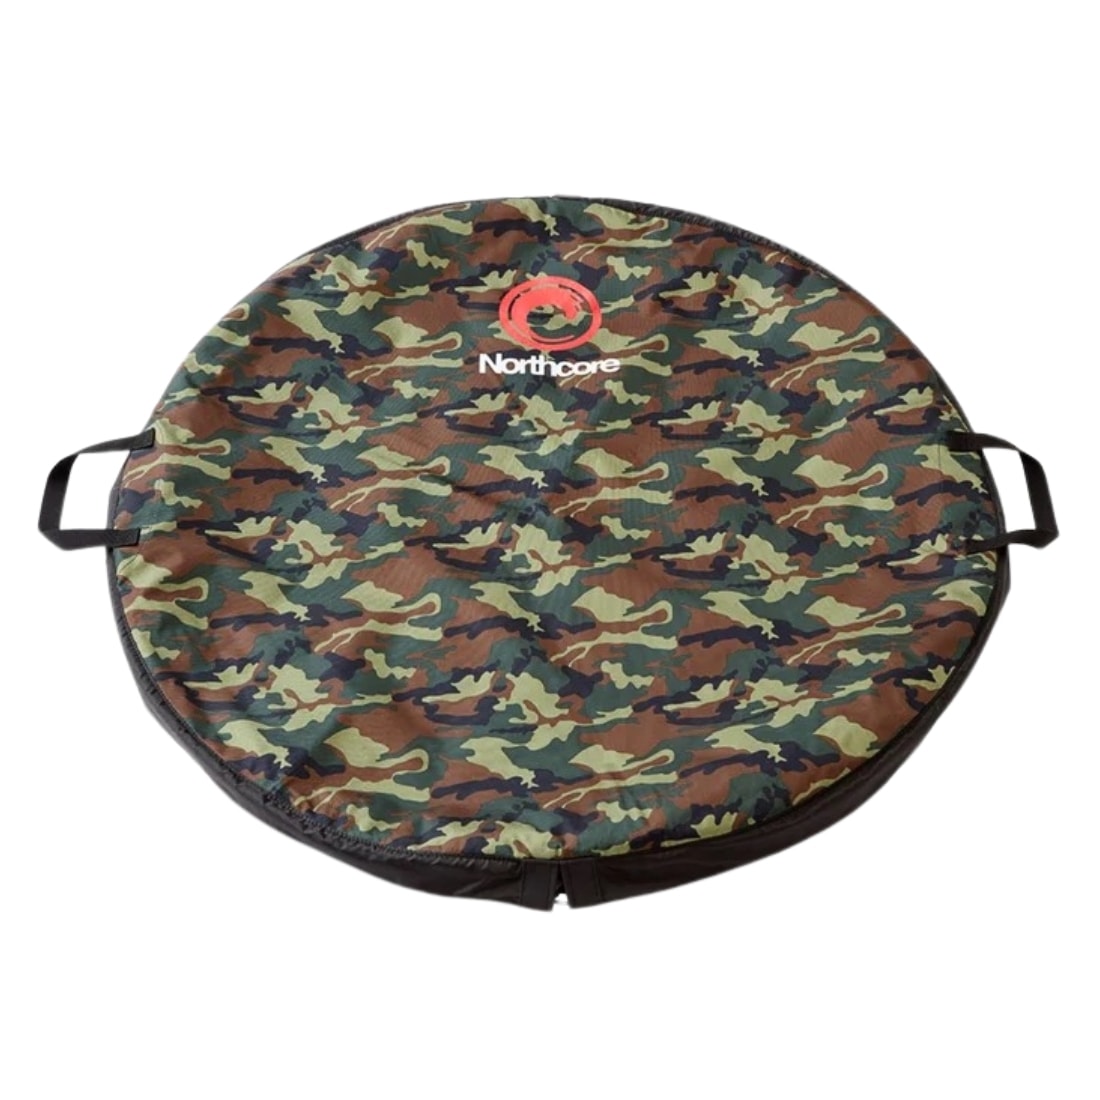 Northcore Grass Waterproof Change Mat/Bag - Camo - Wetsuit Change Mat by Northcore One Size